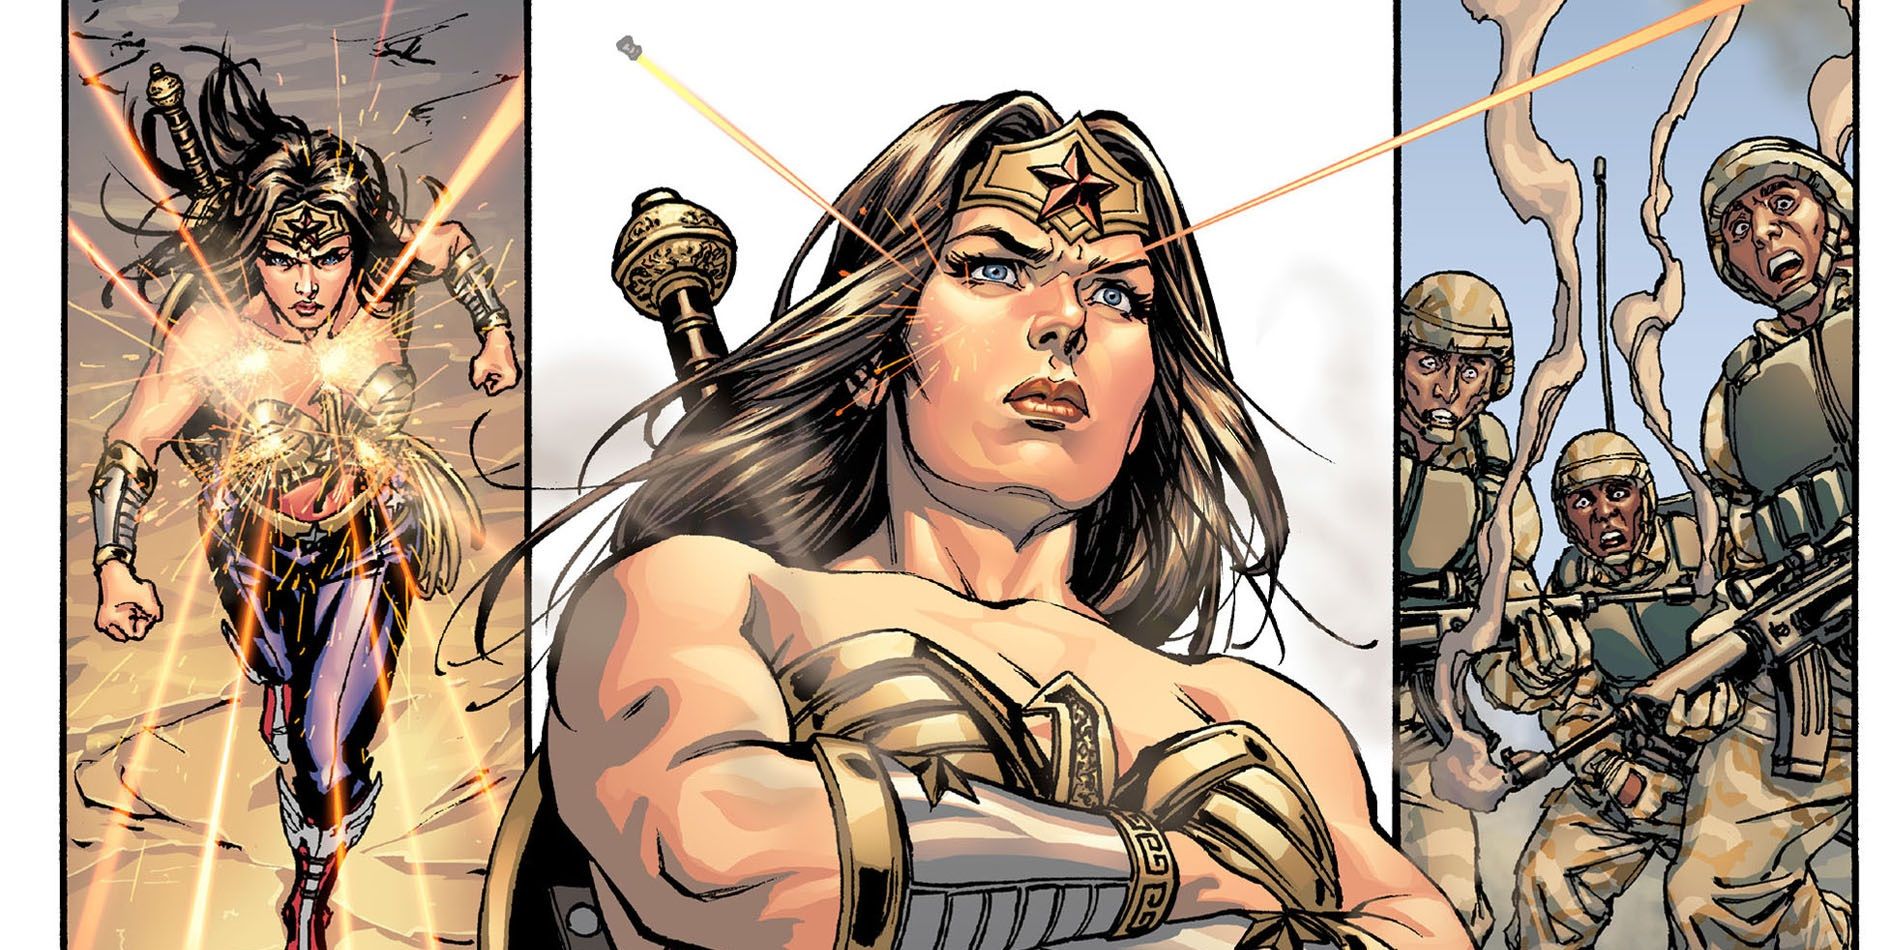 Wonder Woman impervious to being shot by soldiers